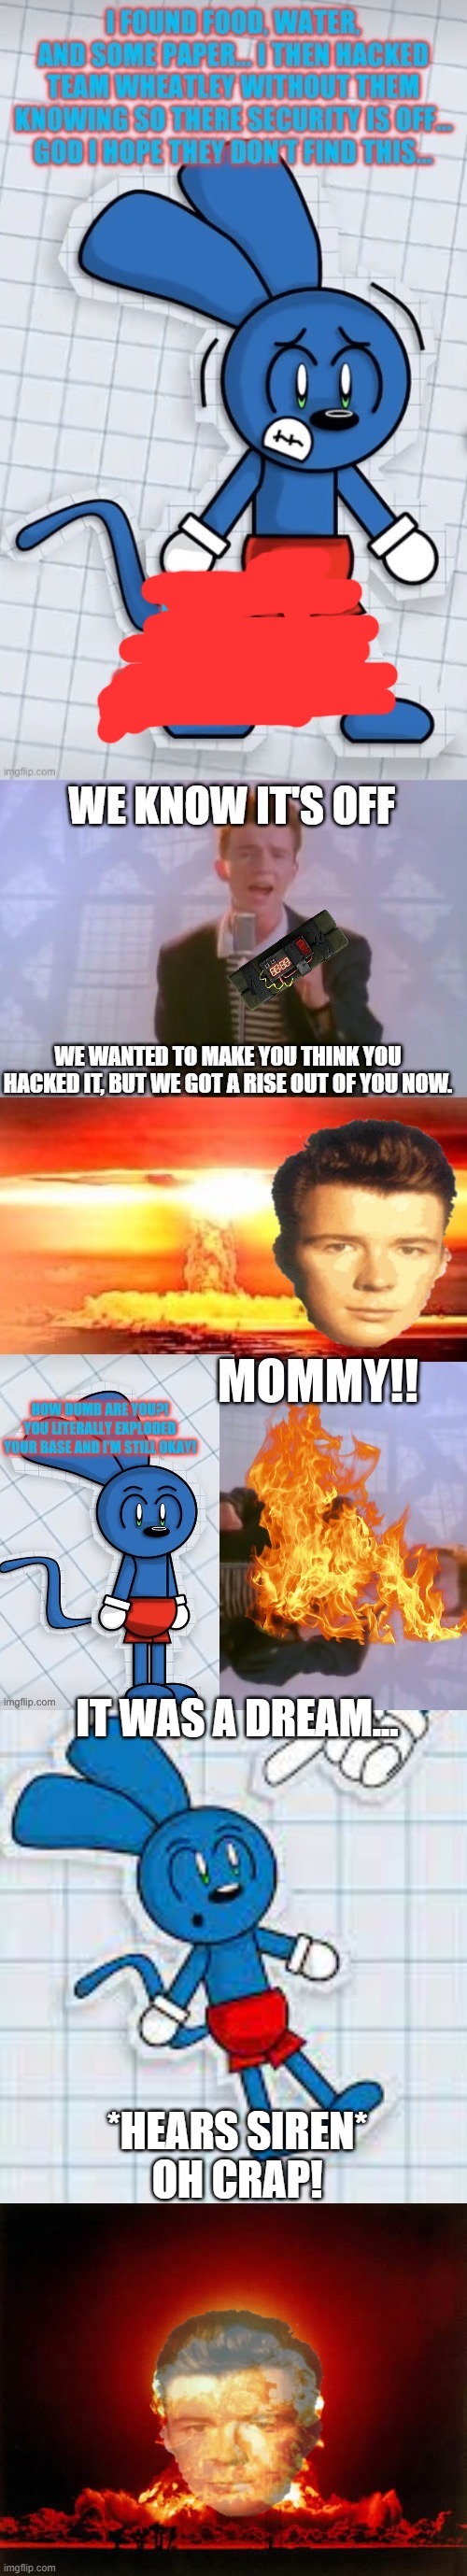 IT WAS A DREAM... *HEARS SIREN*
OH CRAP! | image tagged in memes,nuclear explosion | made w/ Imgflip meme maker